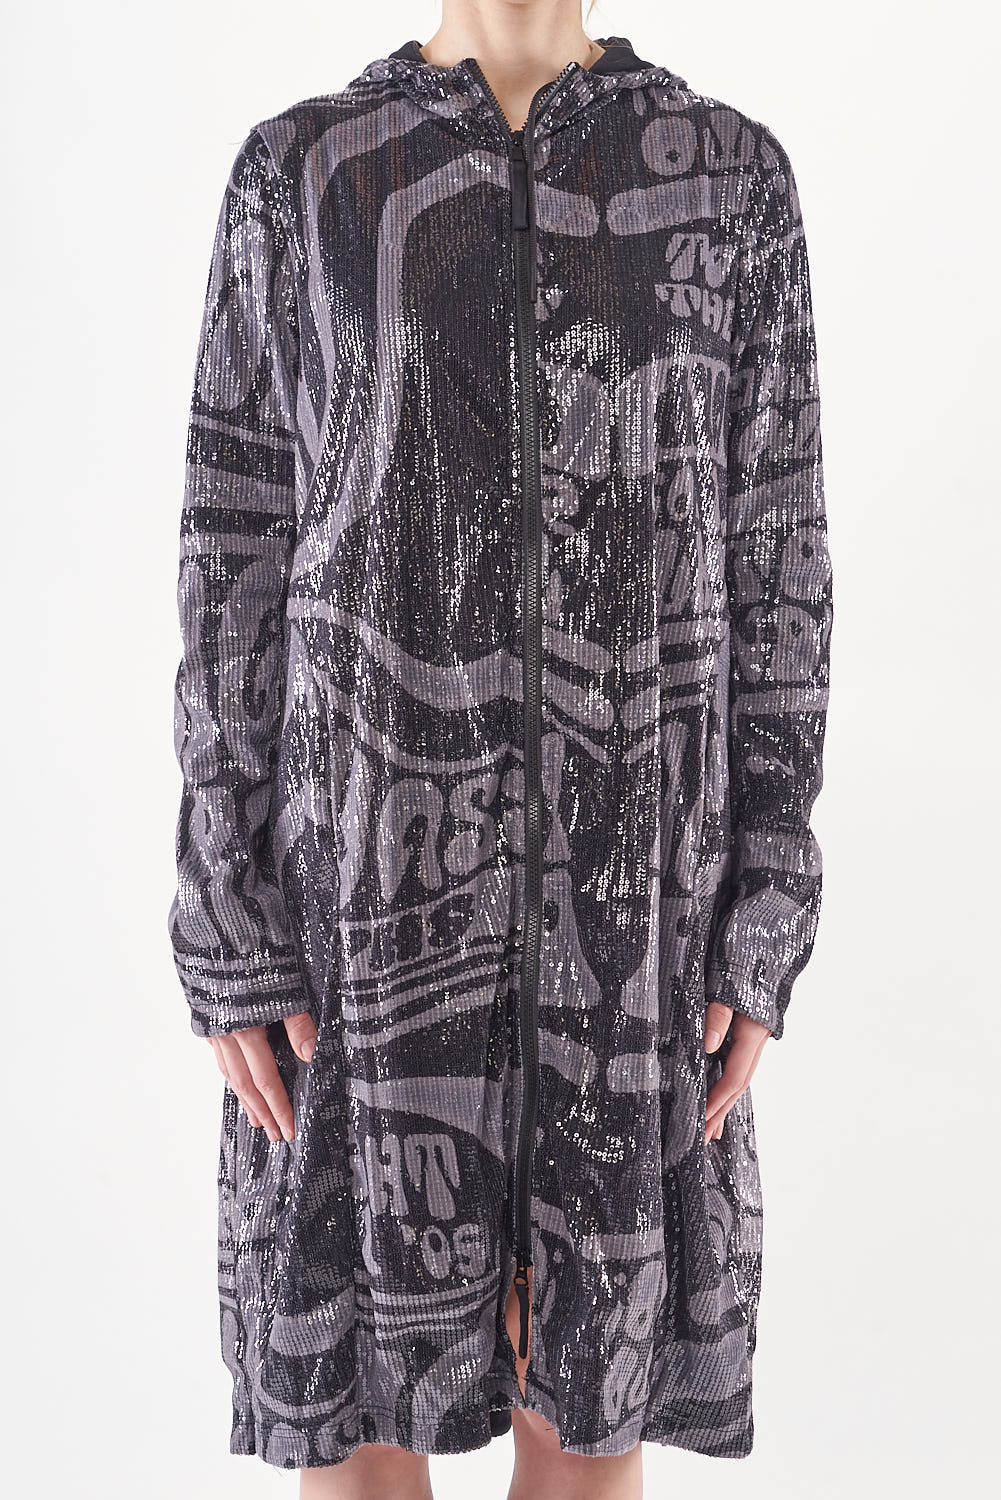 This Zip-front hoodie is encrusted with clear sequins sewn over printed mesh which gives the whole item a liquid sheen.   Collection: Rundholz Black Line  Season: AW 22/23  Style Code: #2223-343-1207  Colour: 101 - Blackprint   Composition: 100% Polyester  Lining 100% Cotton 